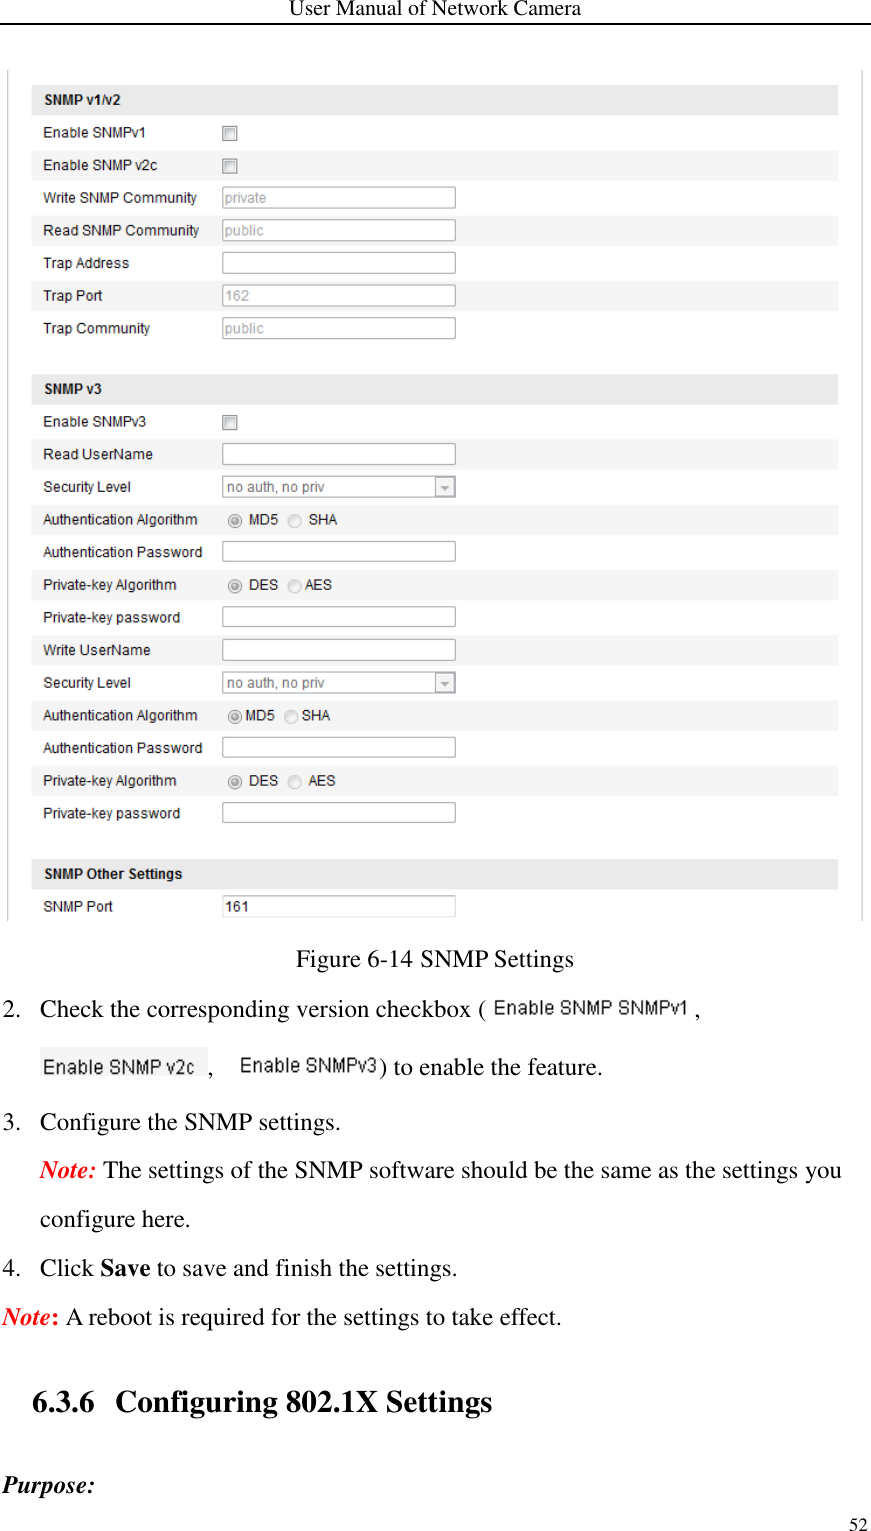 User Manual of Network Camera 52   Figure 6-14 SNMP Settings 2. Check the corresponding version checkbox ( , ,  ) to enable the feature. 3. Configure the SNMP settings. Note: The settings of the SNMP software should be the same as the settings you configure here. 4. Click Save to save and finish the settings. Note: A reboot is required for the settings to take effect.  6.3.6 Configuring 802.1X Settings Purpose: 